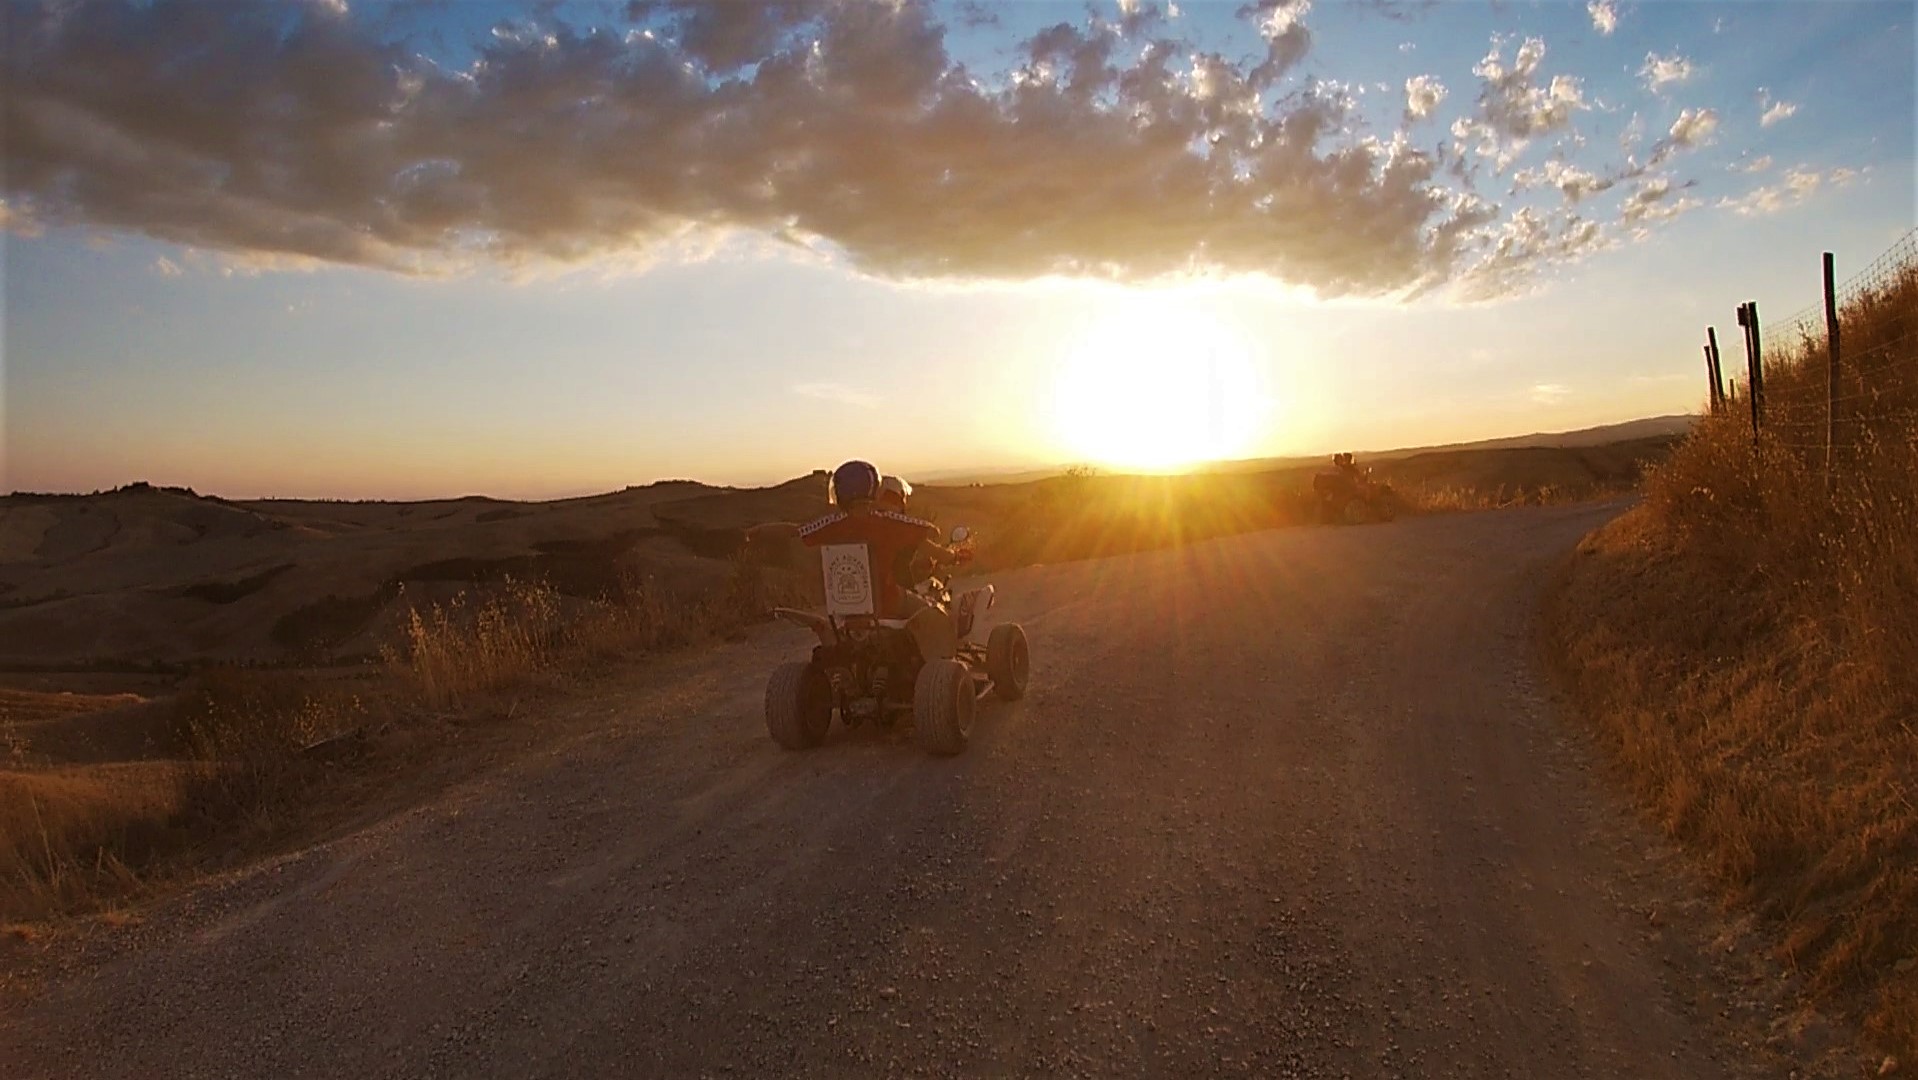 A quad tour at sunset on the hills of Asciano